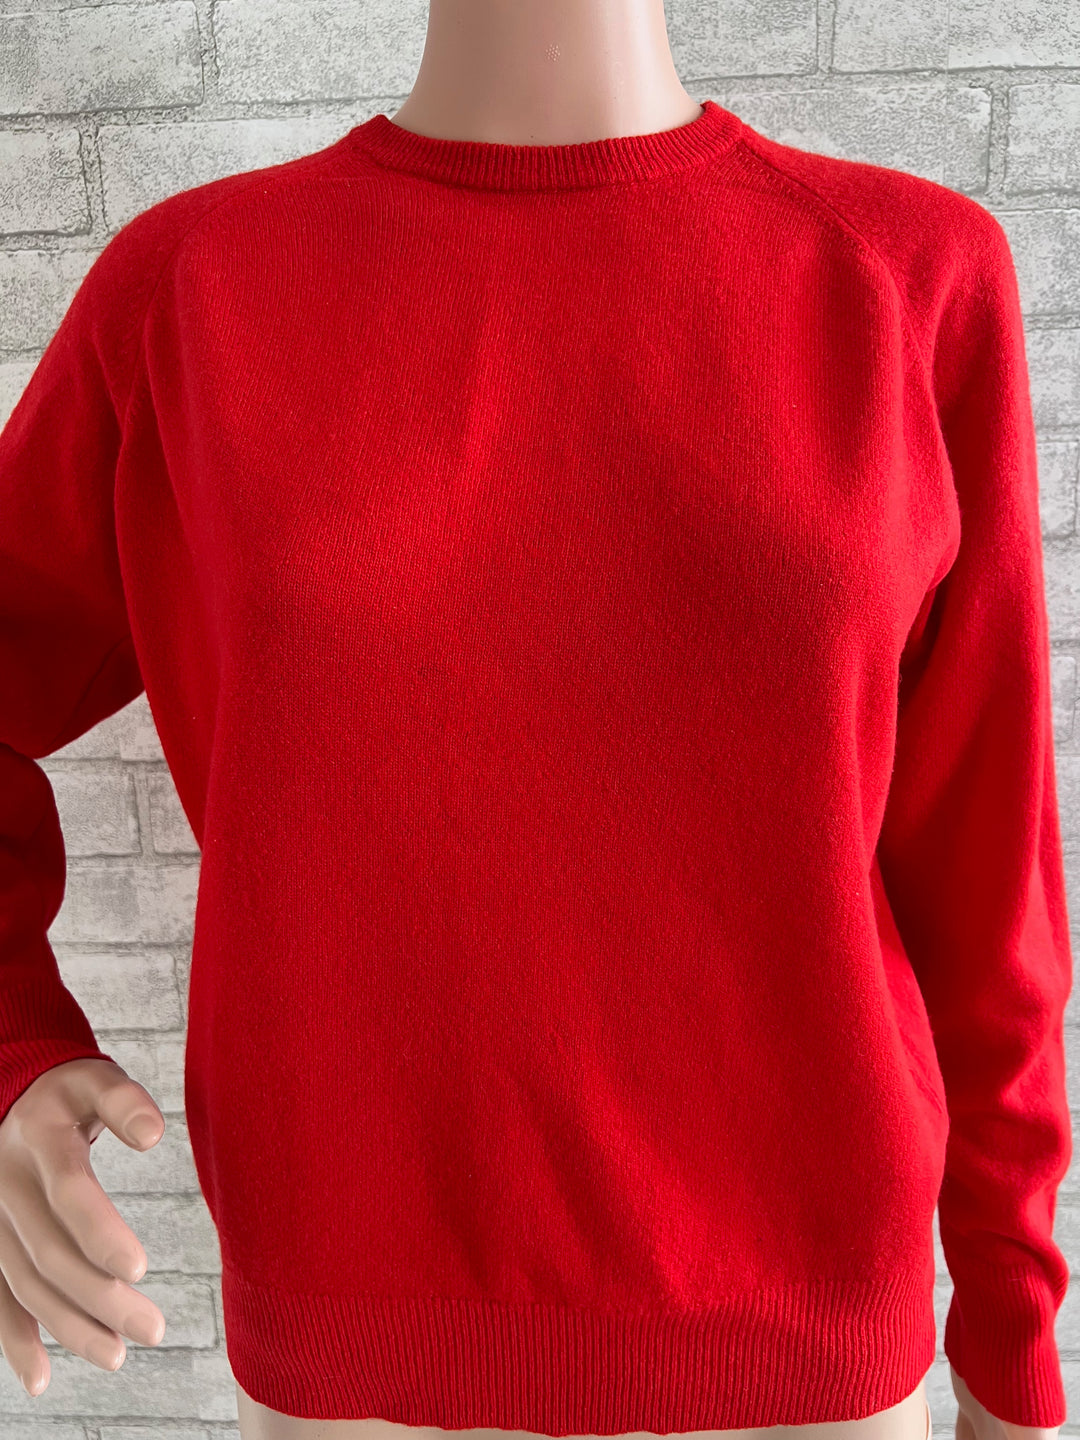 Vintage Women's Red Cashmere Sweater